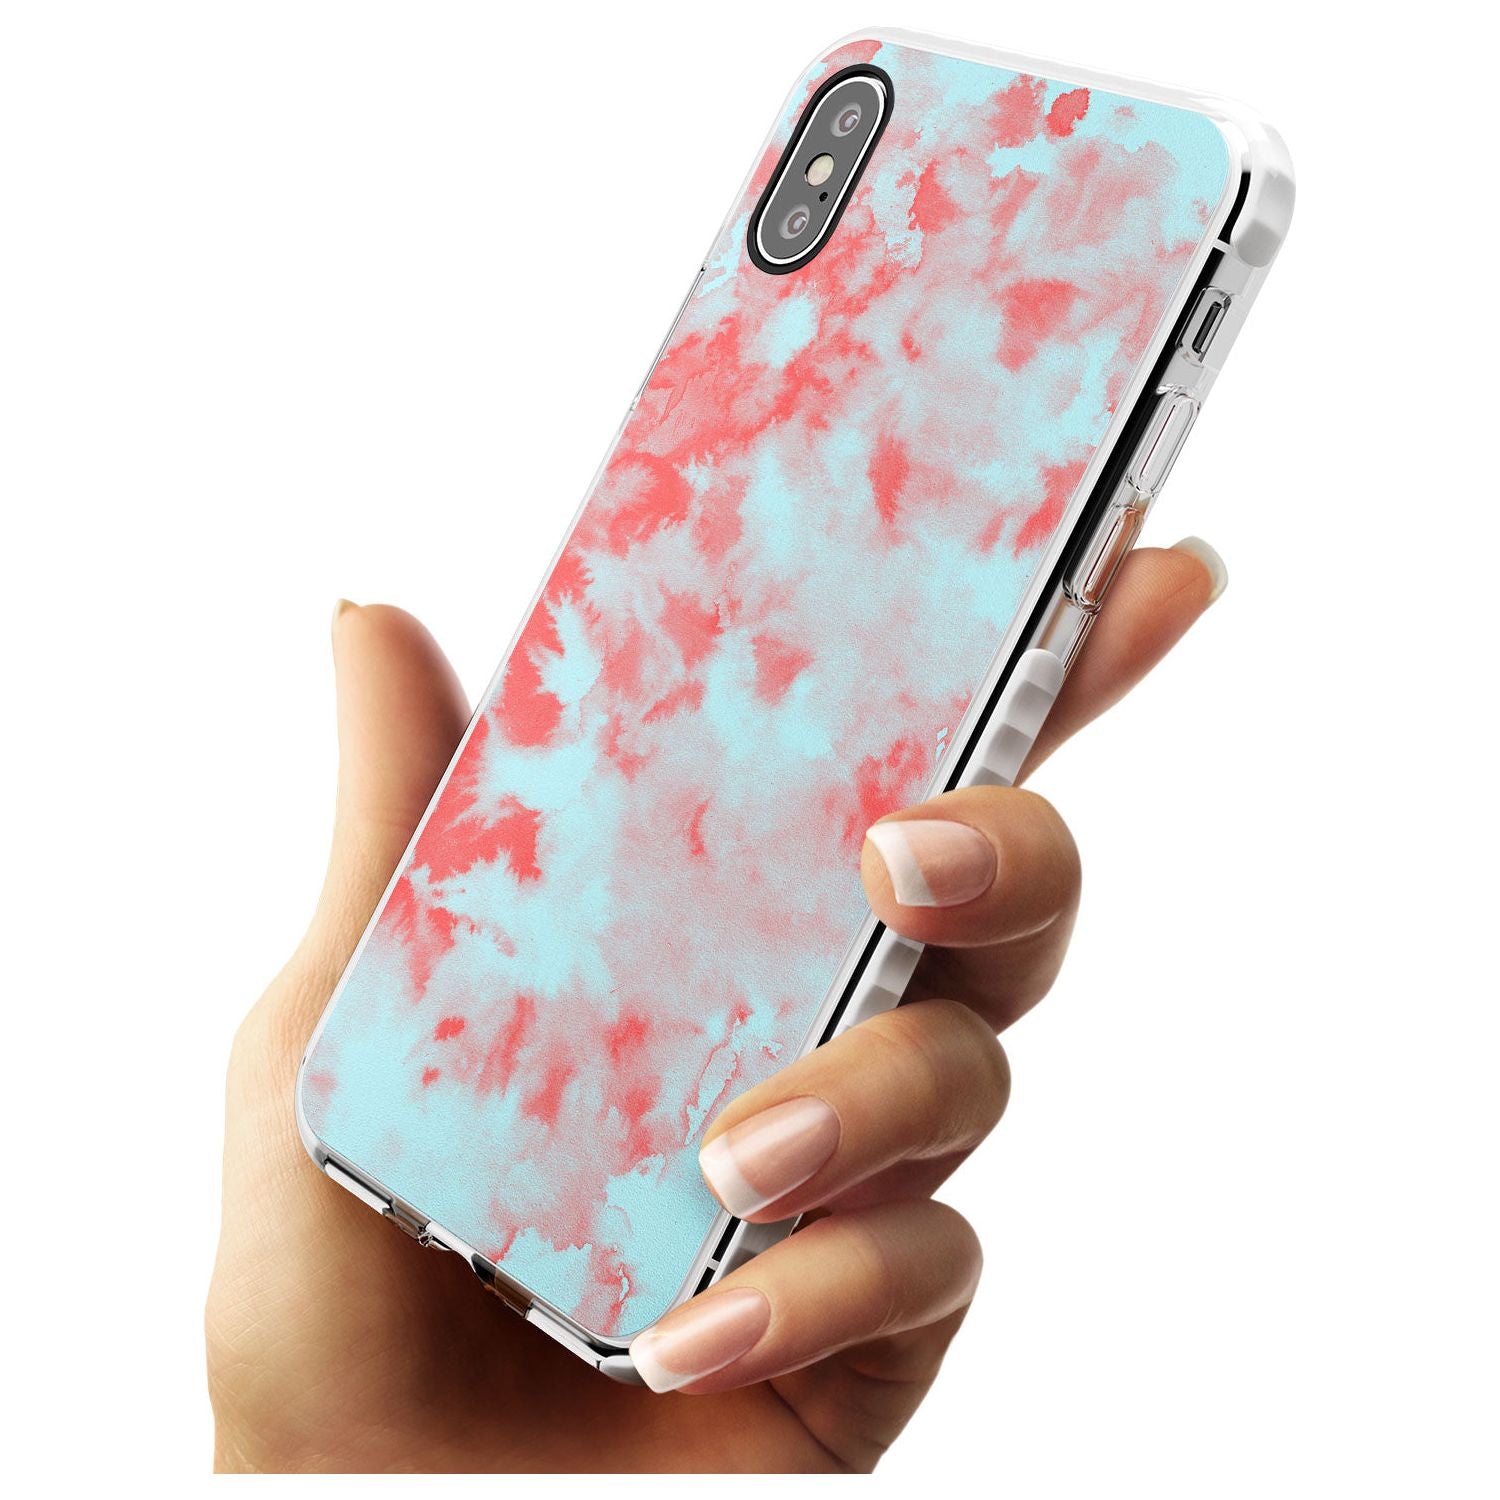 Red & Blue Acid Wash Tie-Dye Pattern Impact Phone Case for iPhone X XS Max XR